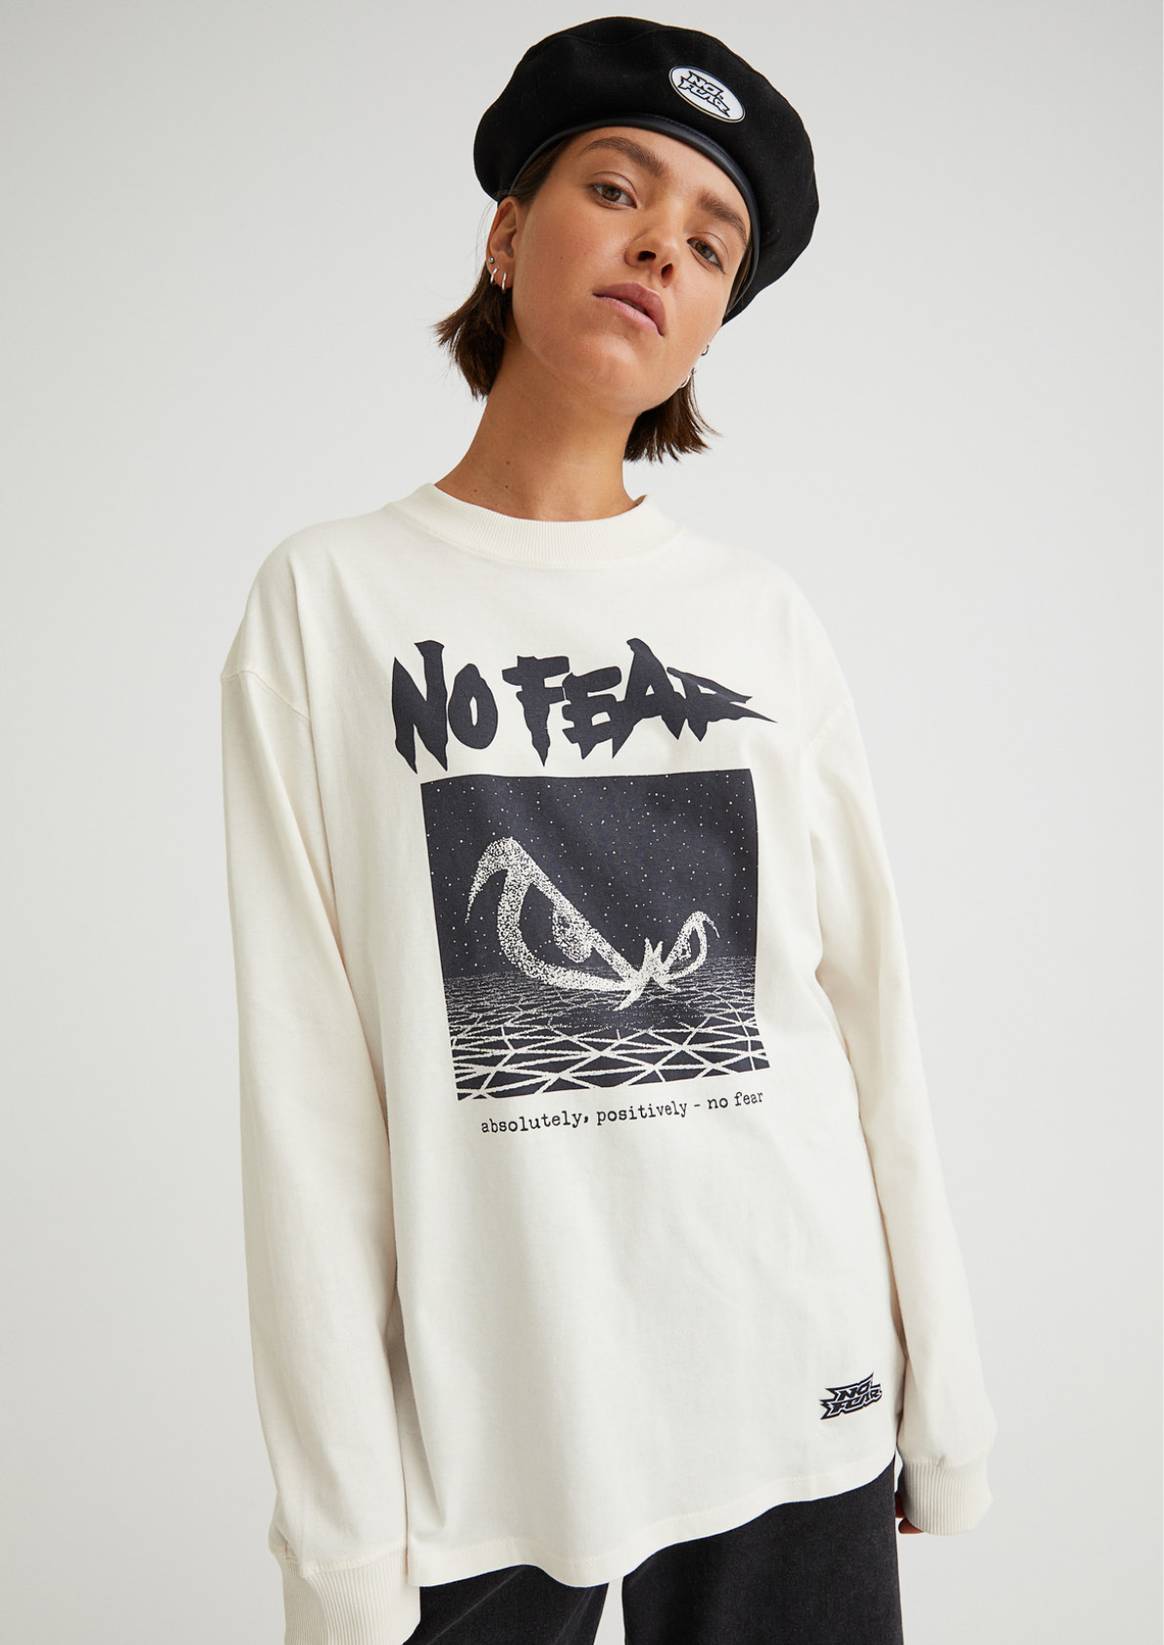 Image: H&M x No Fear and The Skate Kitchen